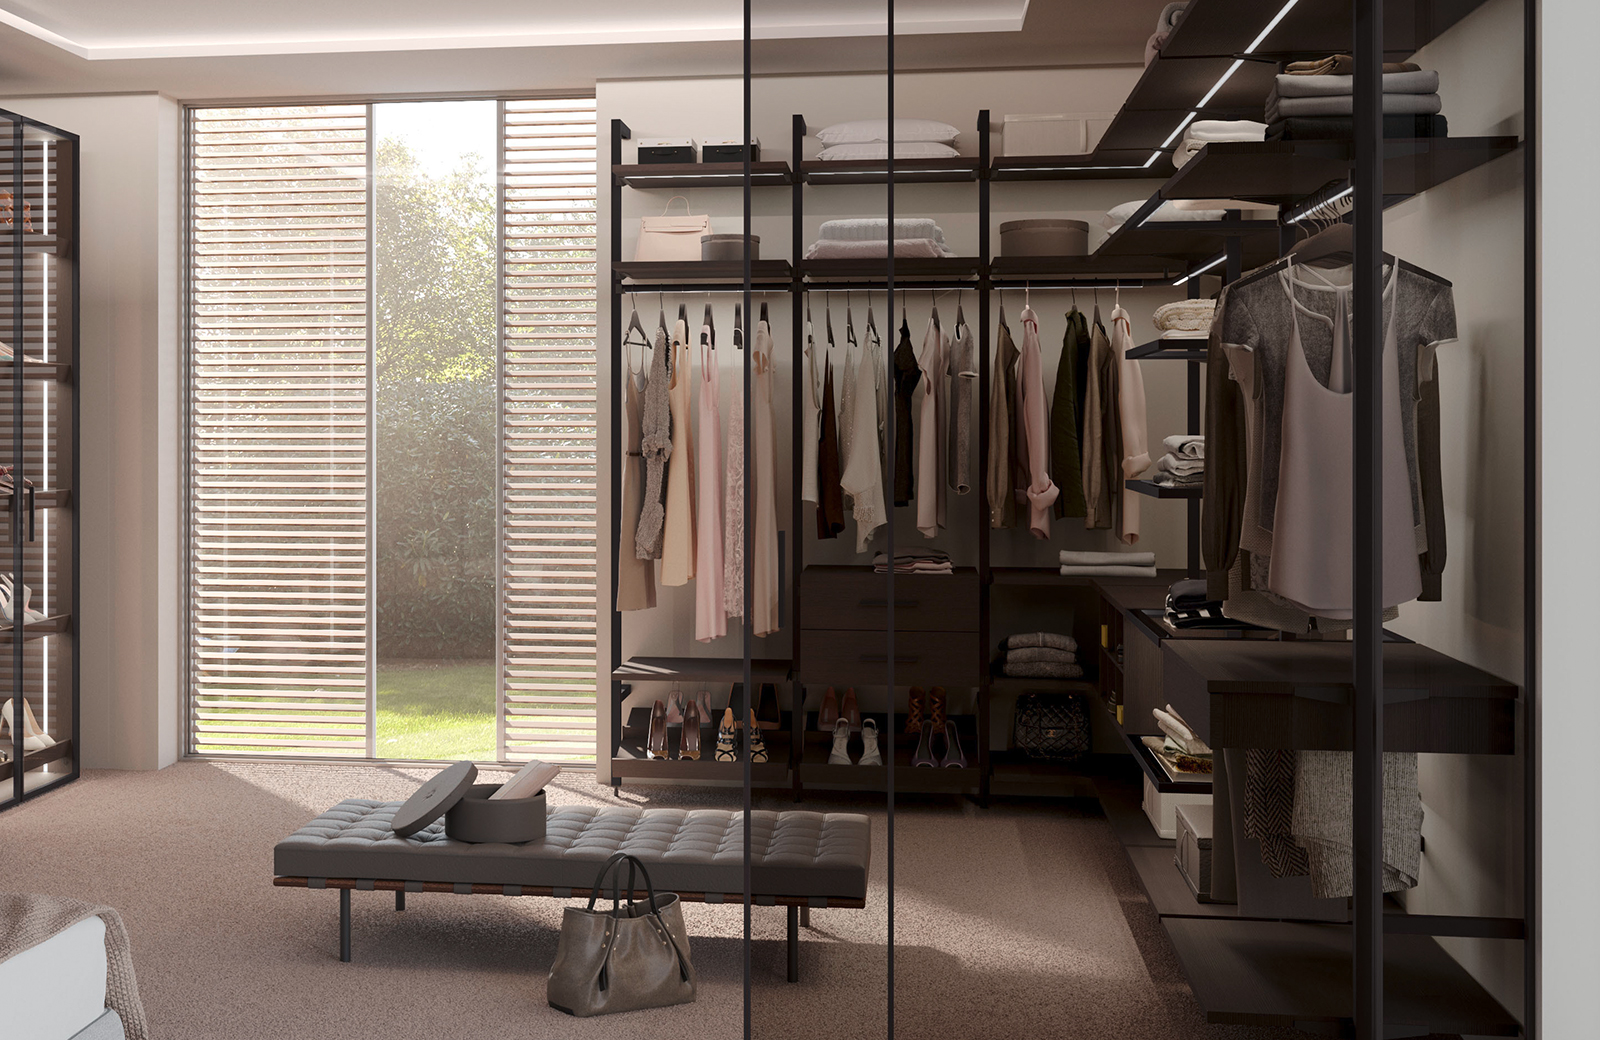 Top 10 Features & Benefits Of A Luxury Walk-in Closet